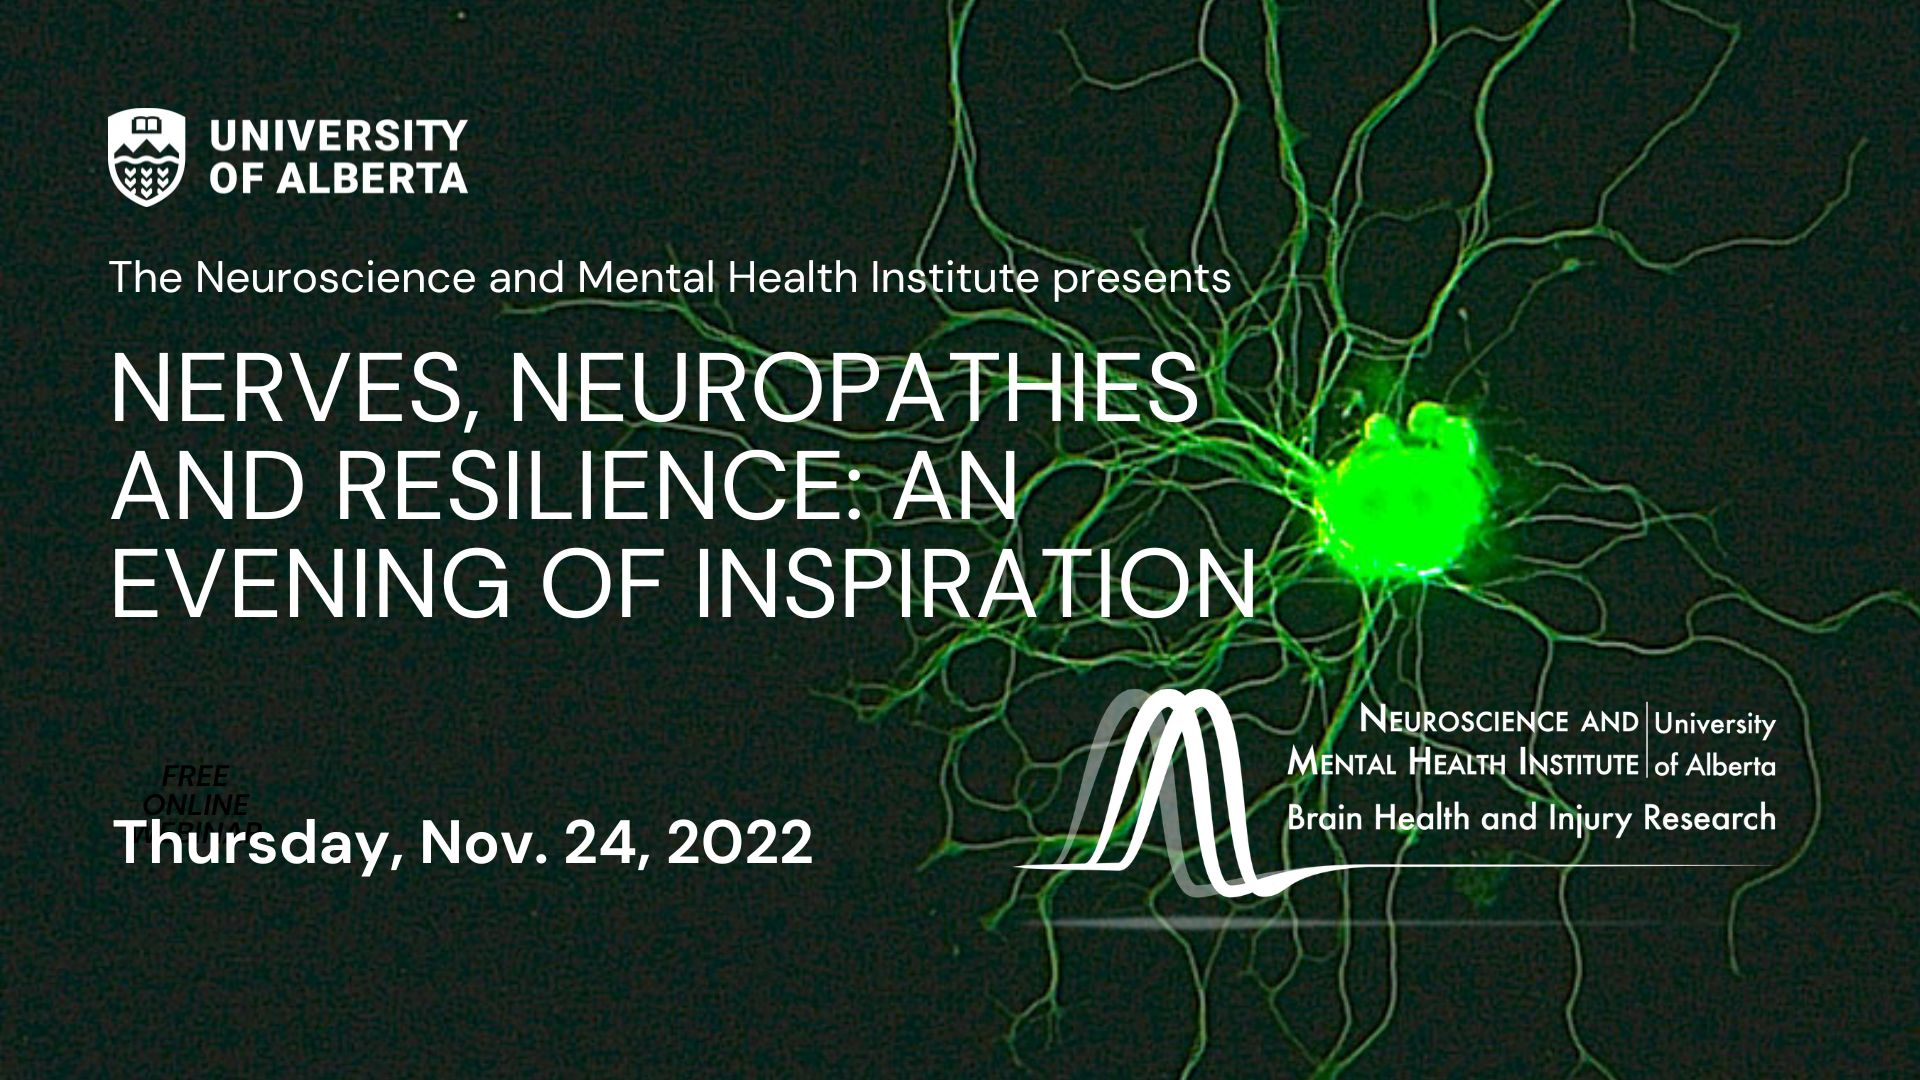 video-nerves,-neuropathies-and-resilience-an-evening-of-inspiration-graphic-.jpg